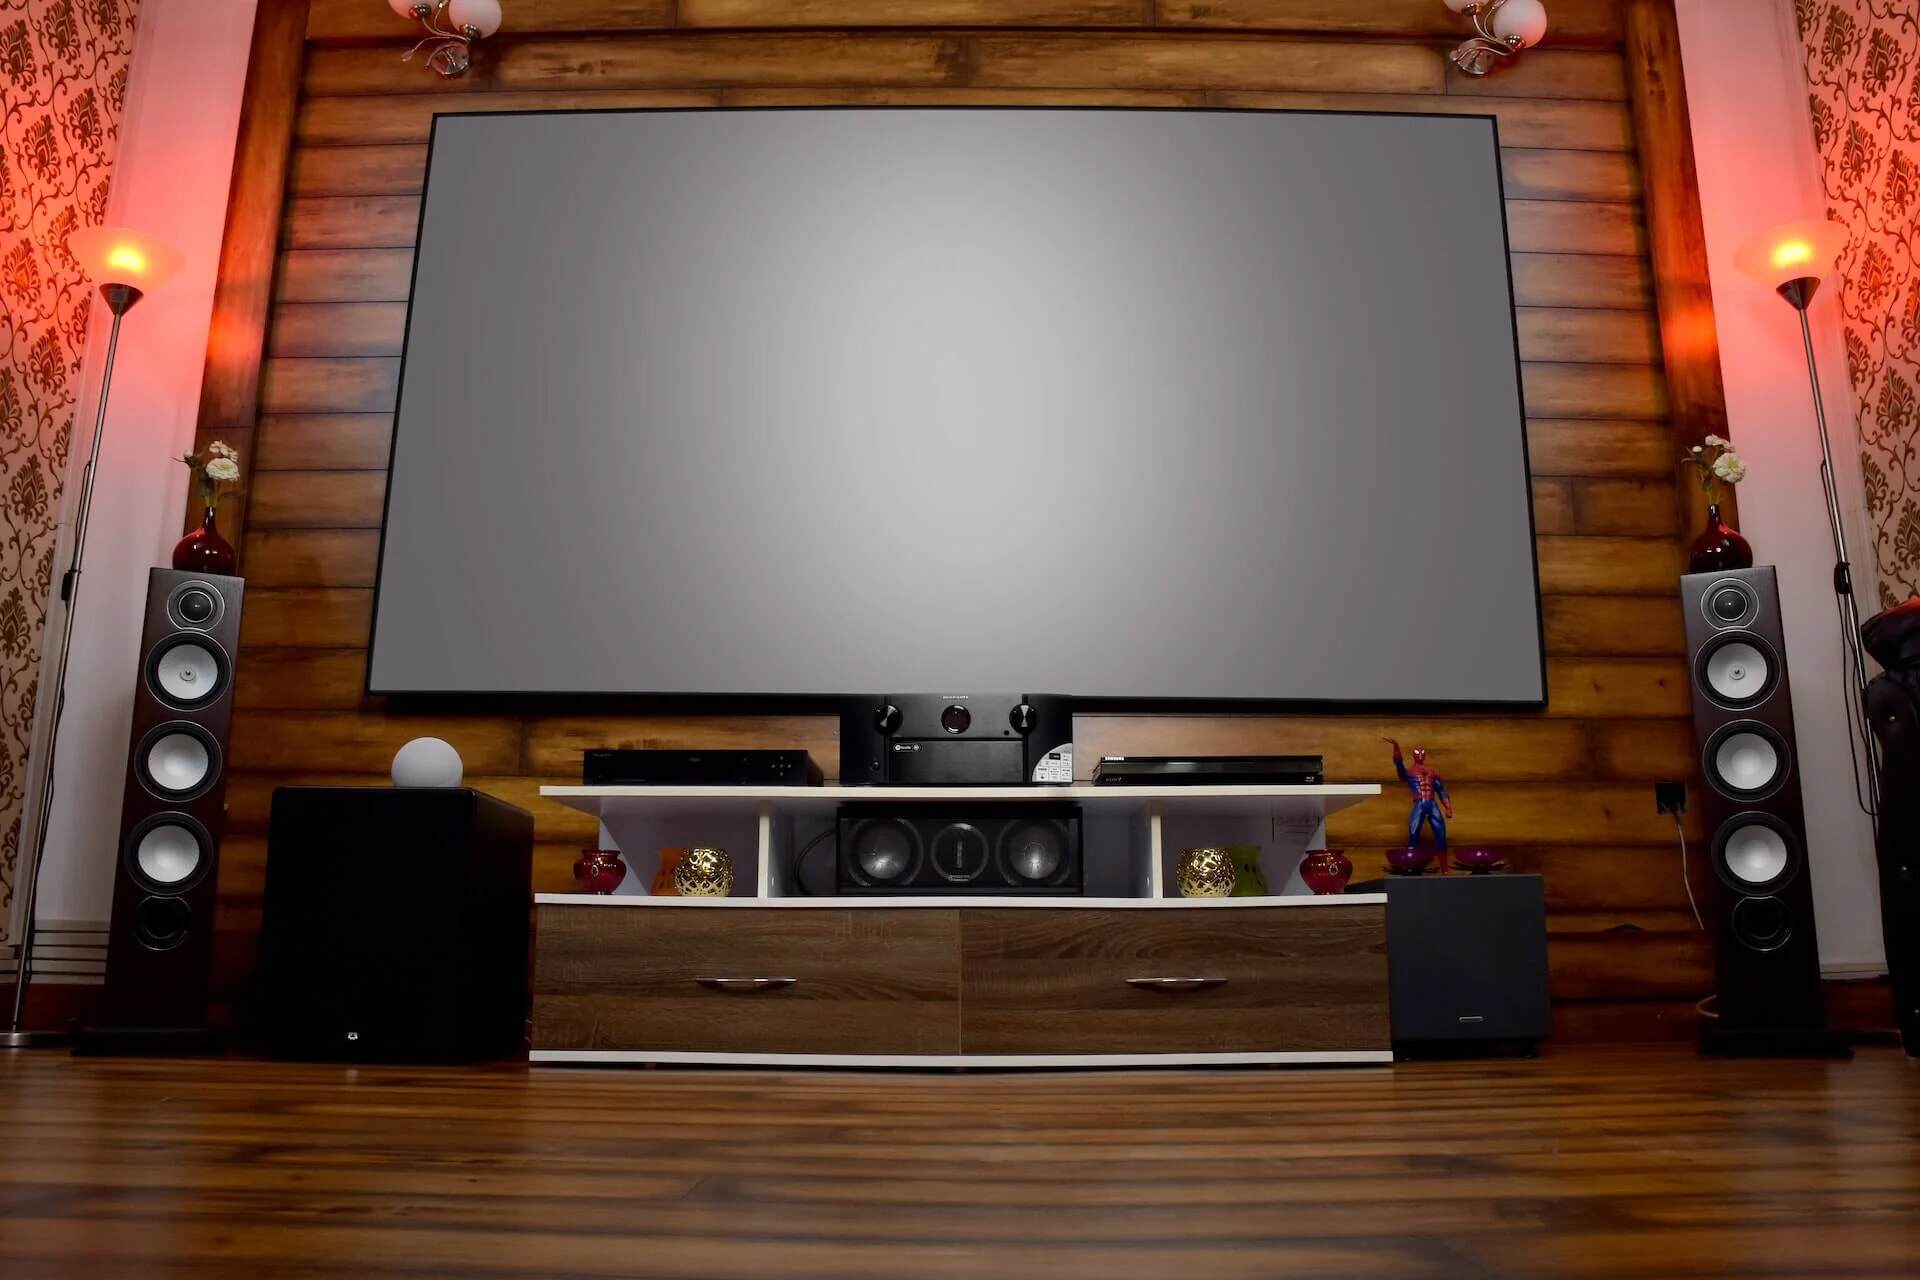 Instructions On How To Hook Up An Innovative IV-11 Surround Sound System To TV